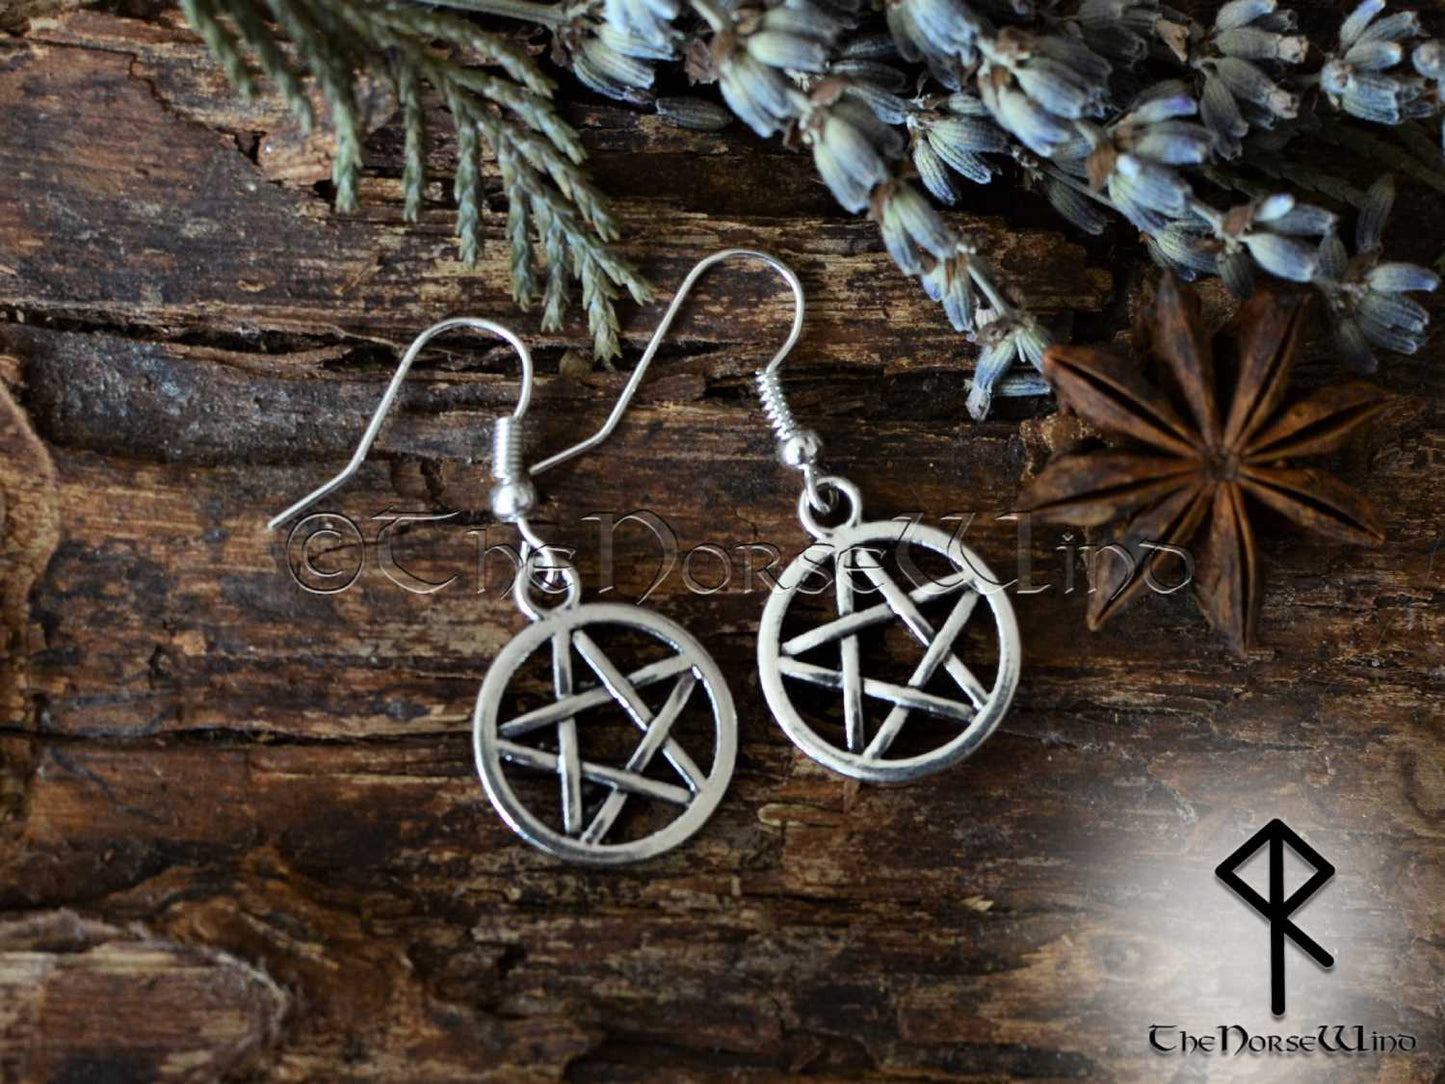 Pentacle Earrings, Pentagram Witch Jewelry Wicca Earrings, Pagan Earrings, Tribal Earrings, Gothic Jewelry, Witchy Gift TheNorseWind